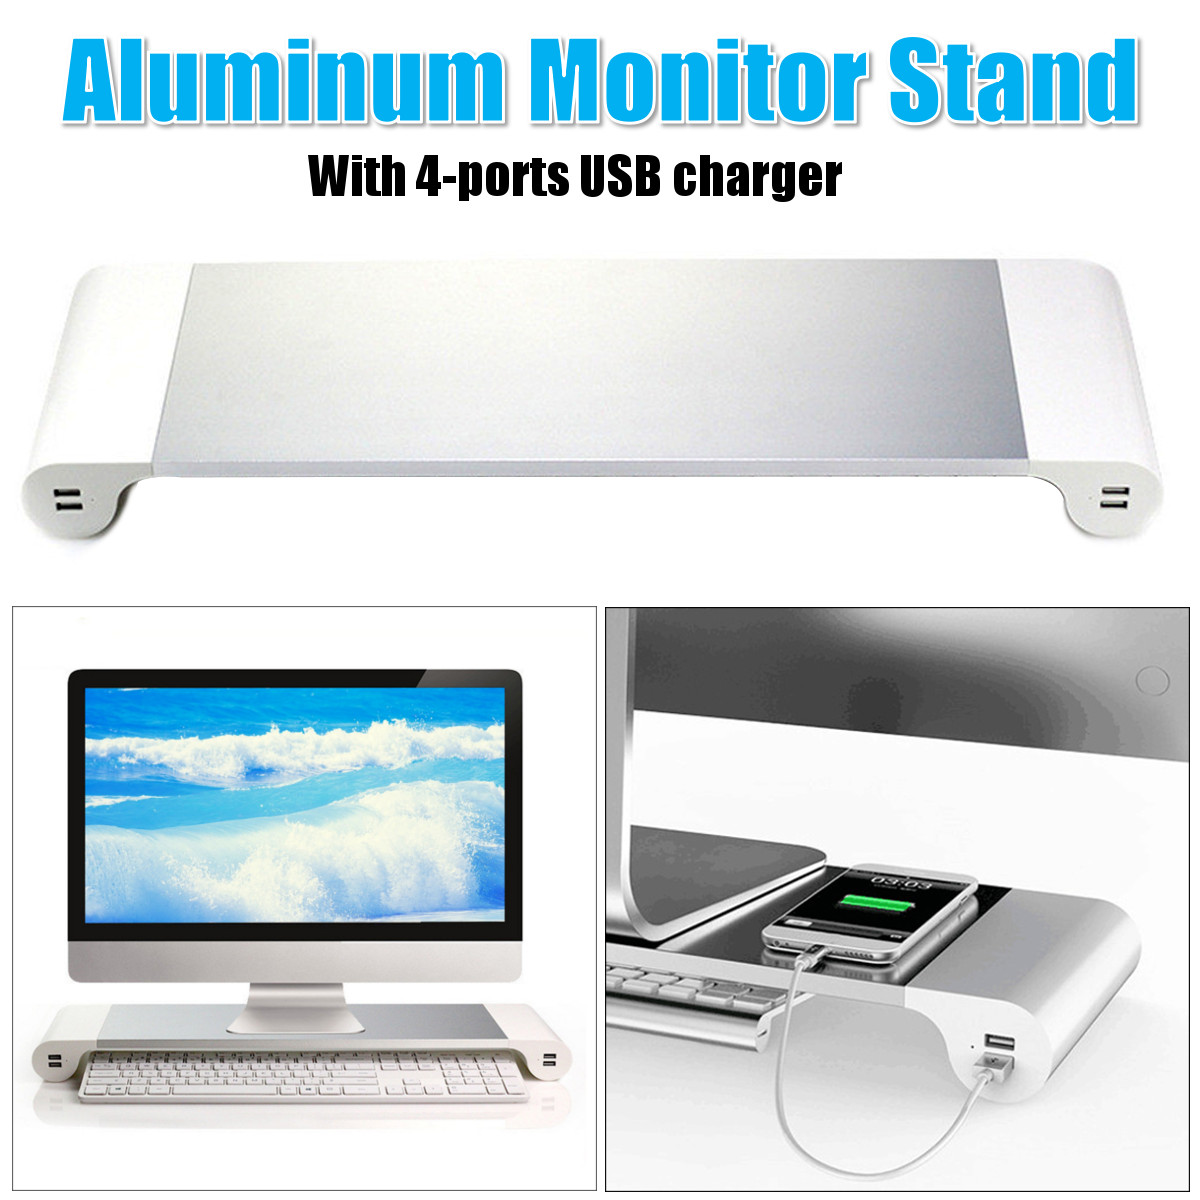 Aluminum-Desktop-Monitor-Stand-Non-slip-Notebook-Laptop-Riser-with-4-ports-USB-charger-for-iMac-MacB-1639044-1